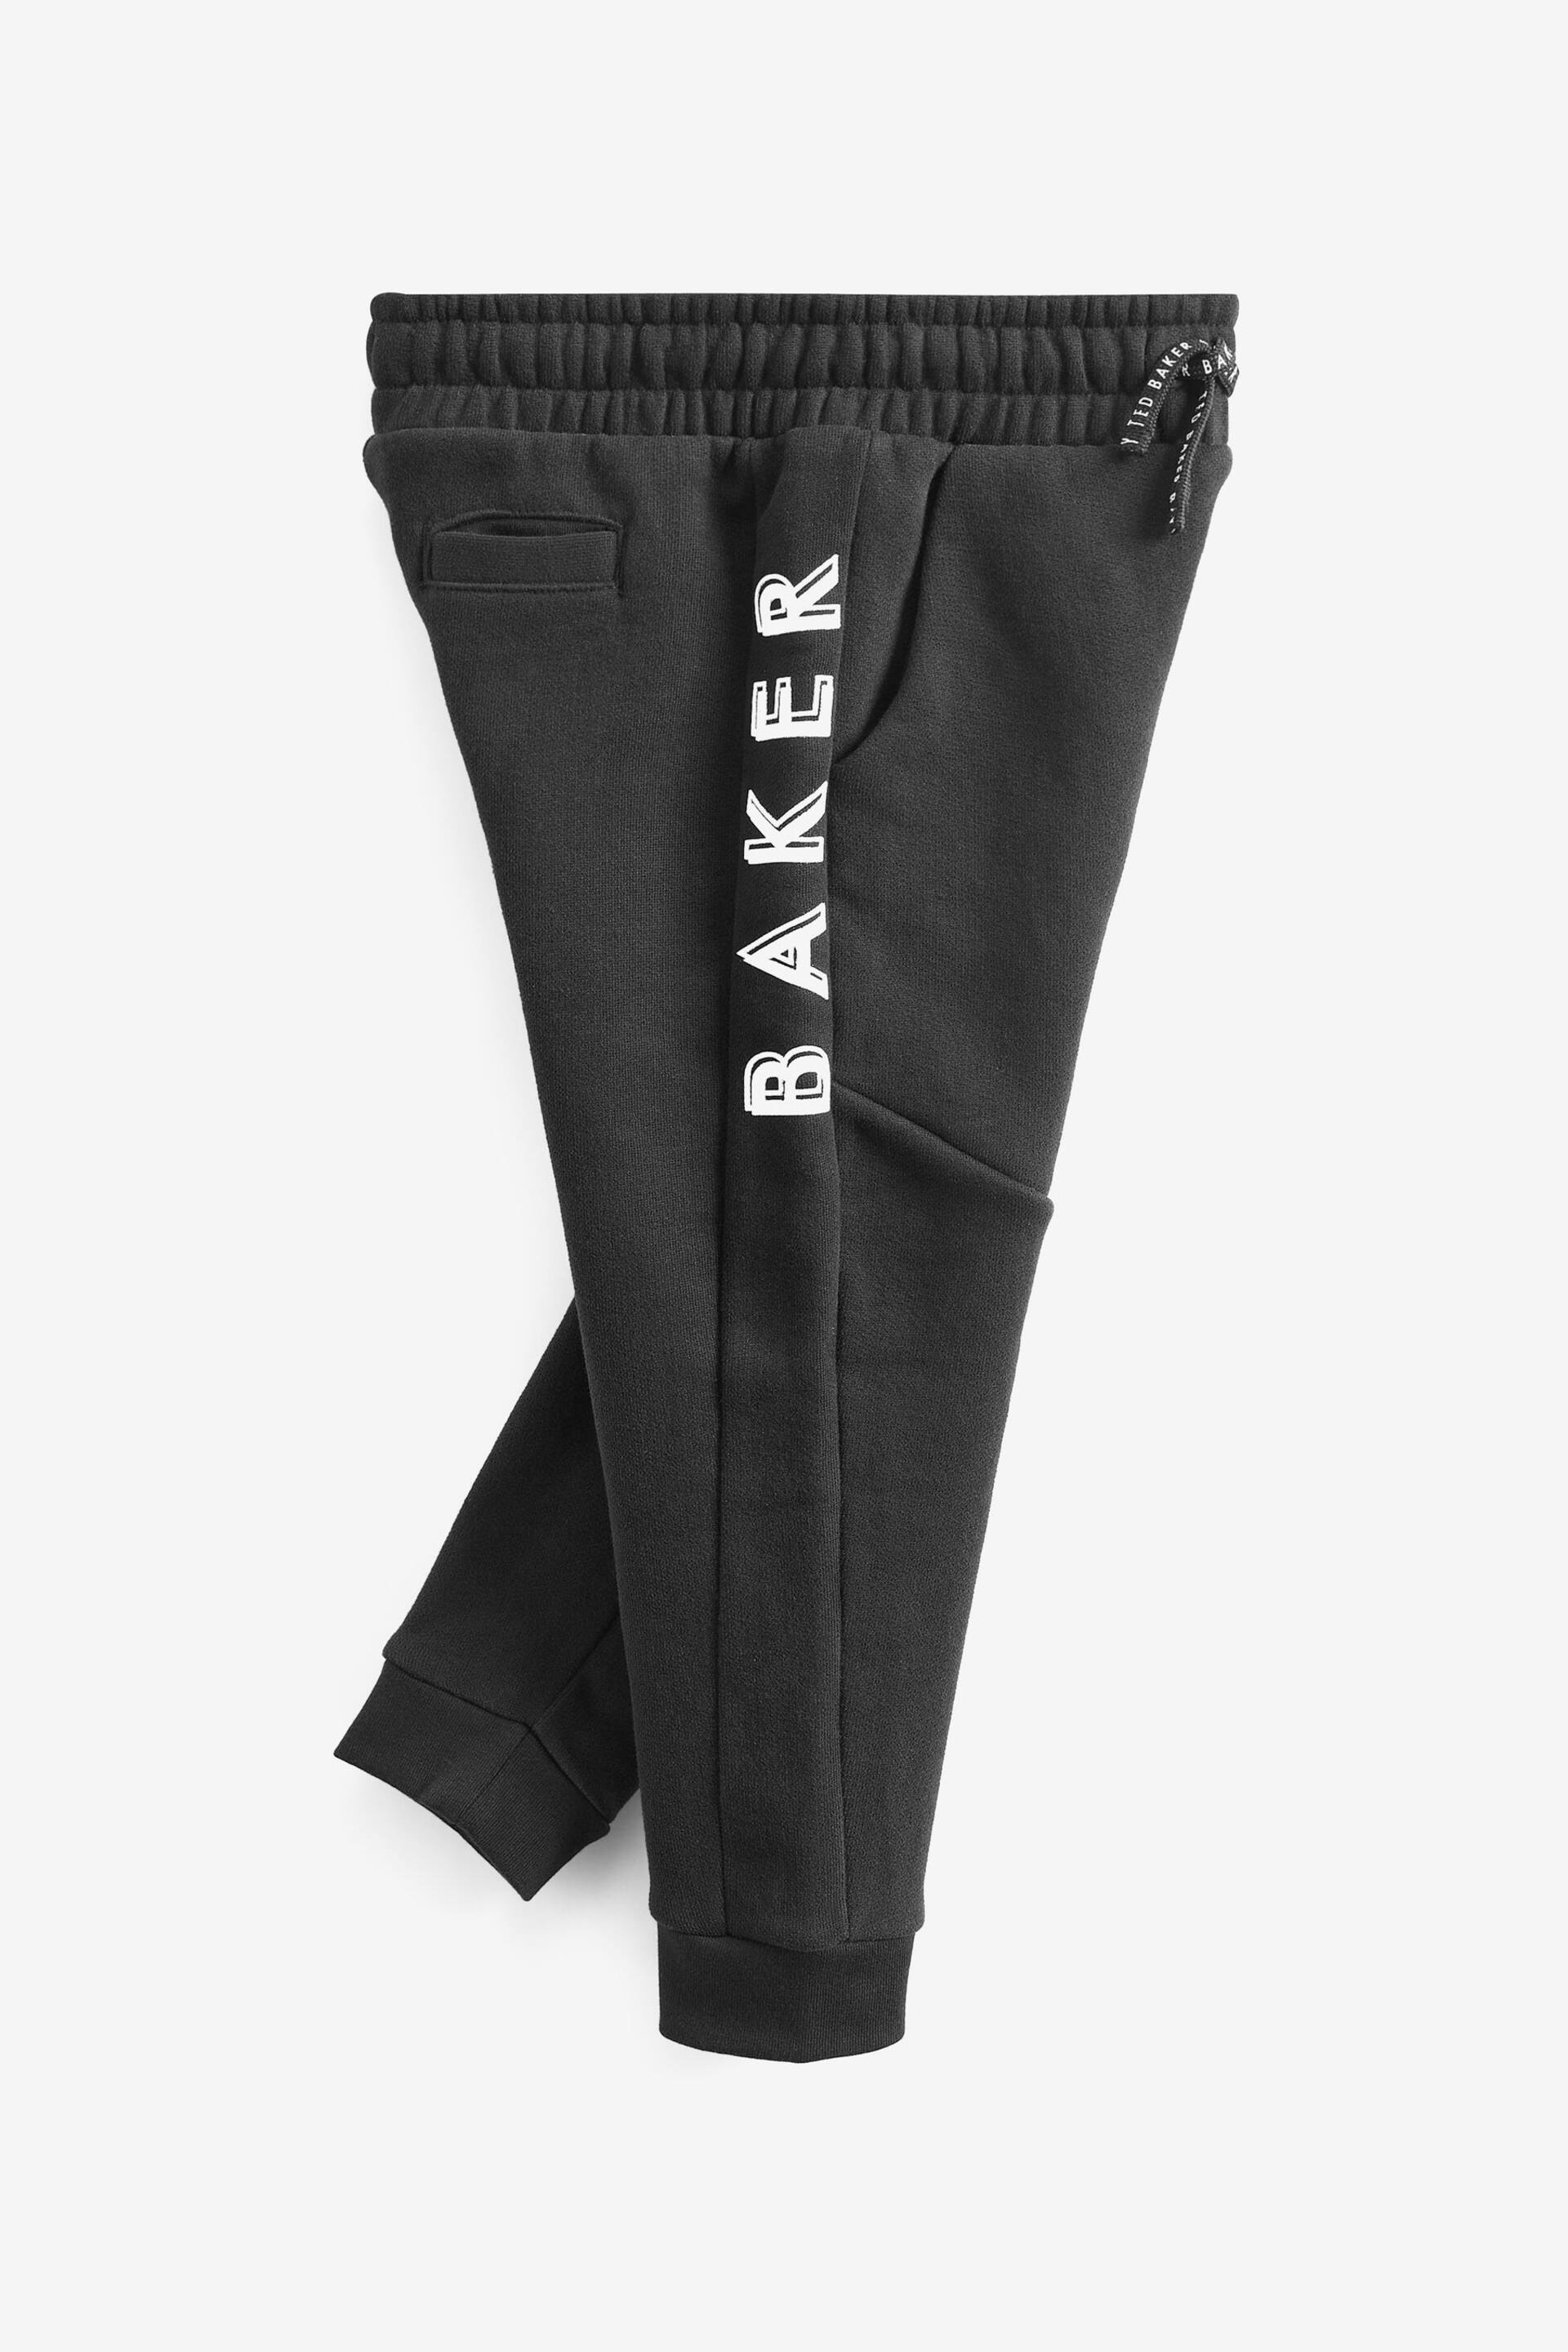 Baker by Ted Baker Zip Through Hoodie and Jogger Set - Image 9 of 11